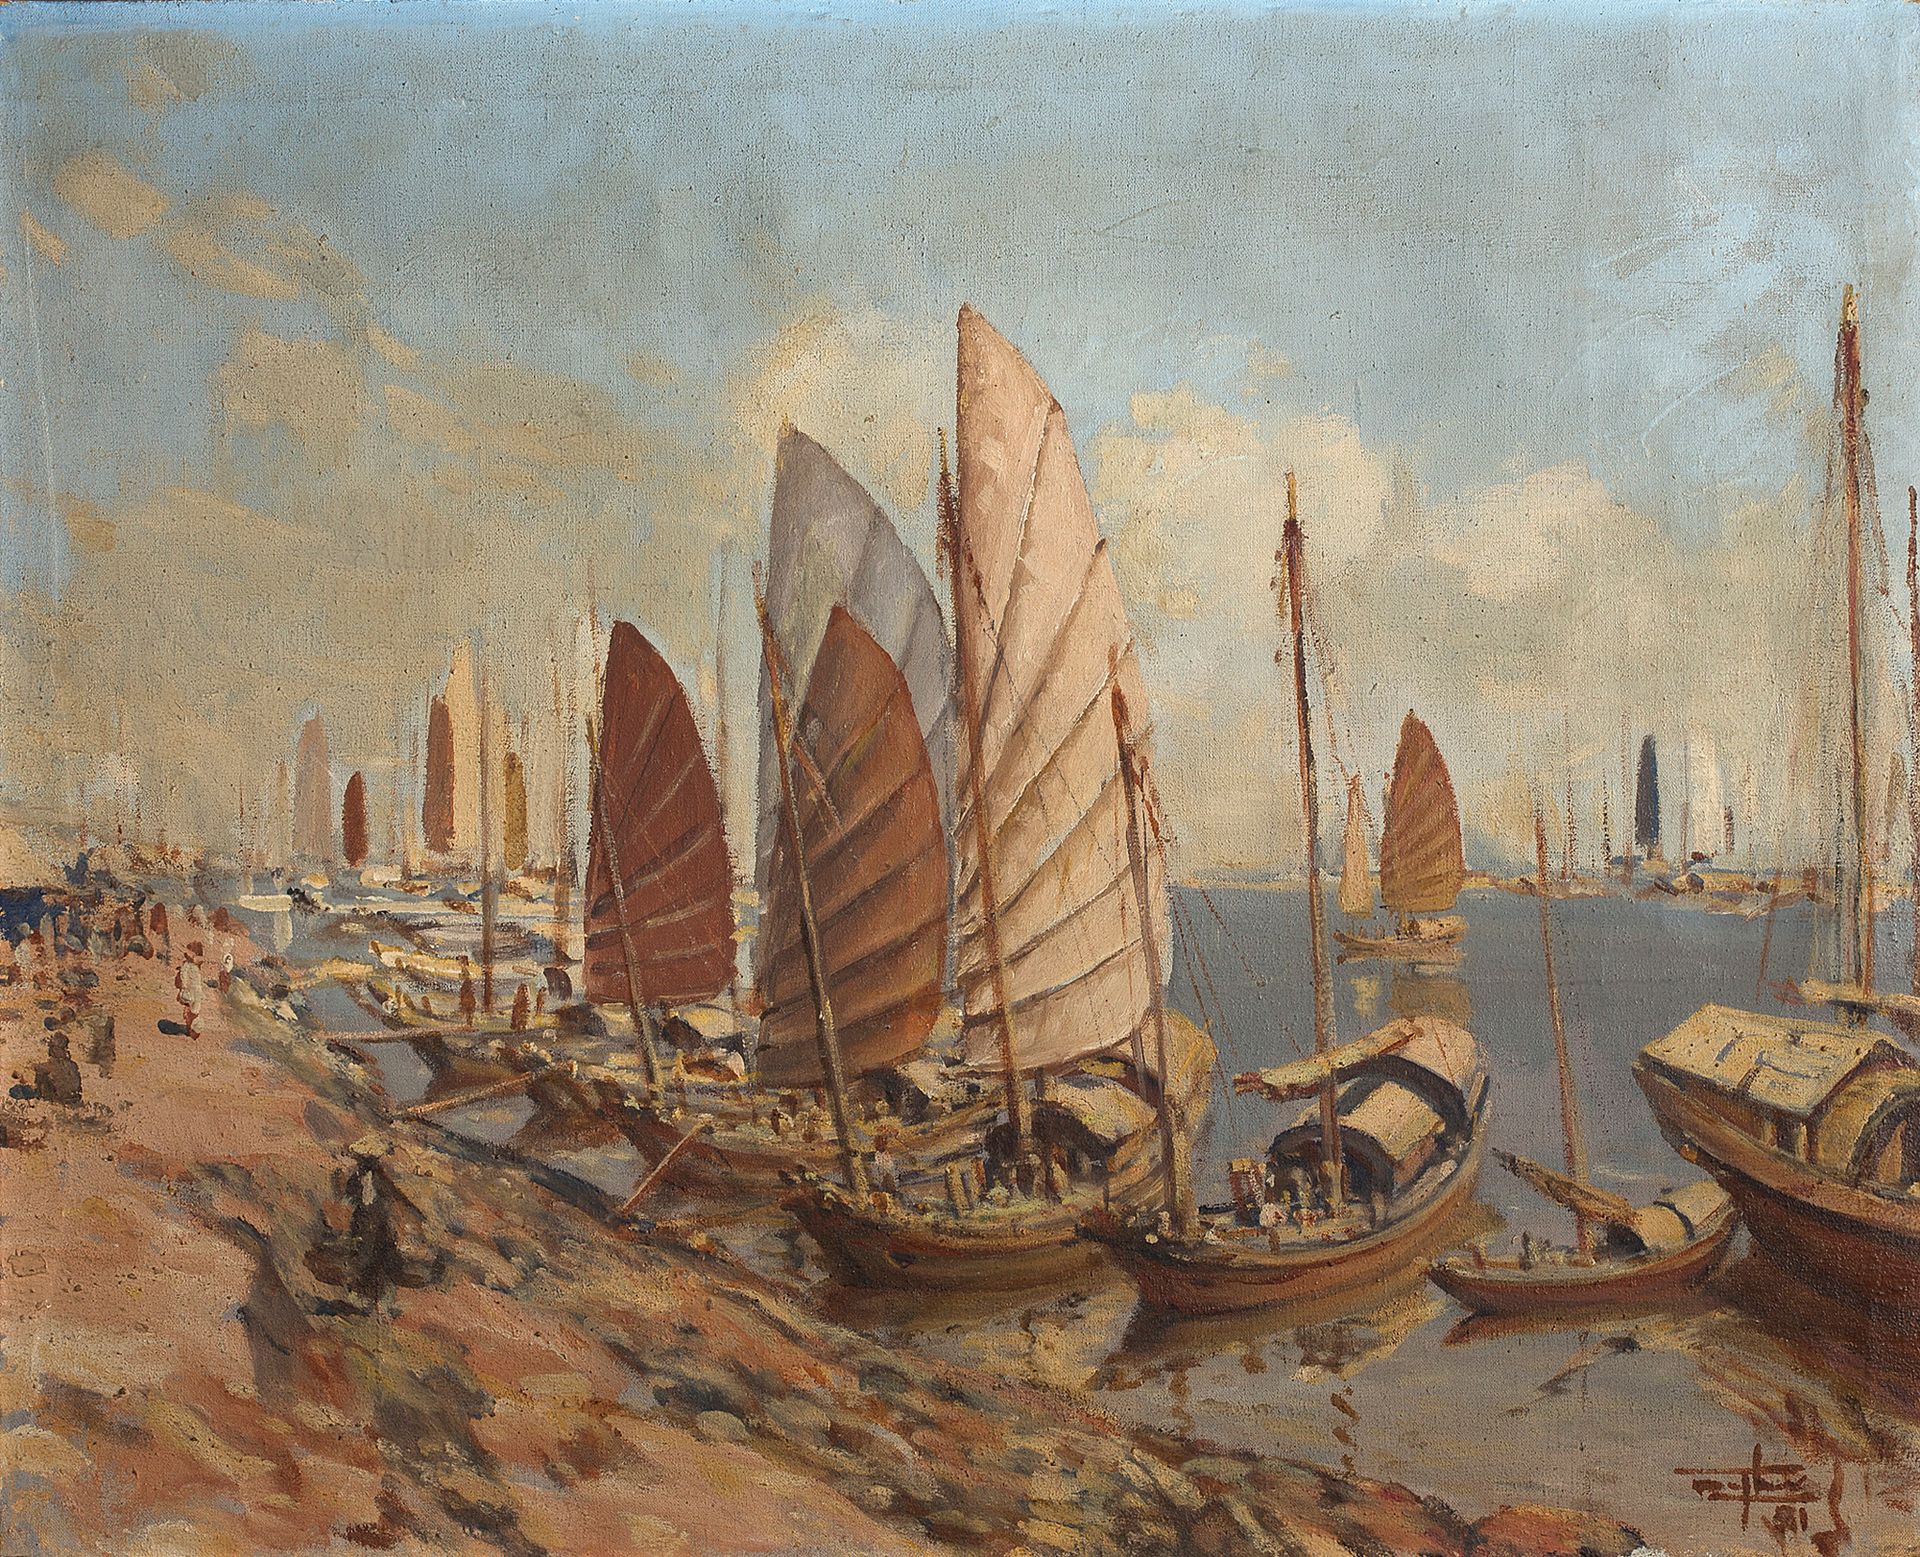 NGUYEN MAI THU (XXE SIÈCLE) 
Jonques dans la baie

Oil on canvas, signed and dat&hellip;